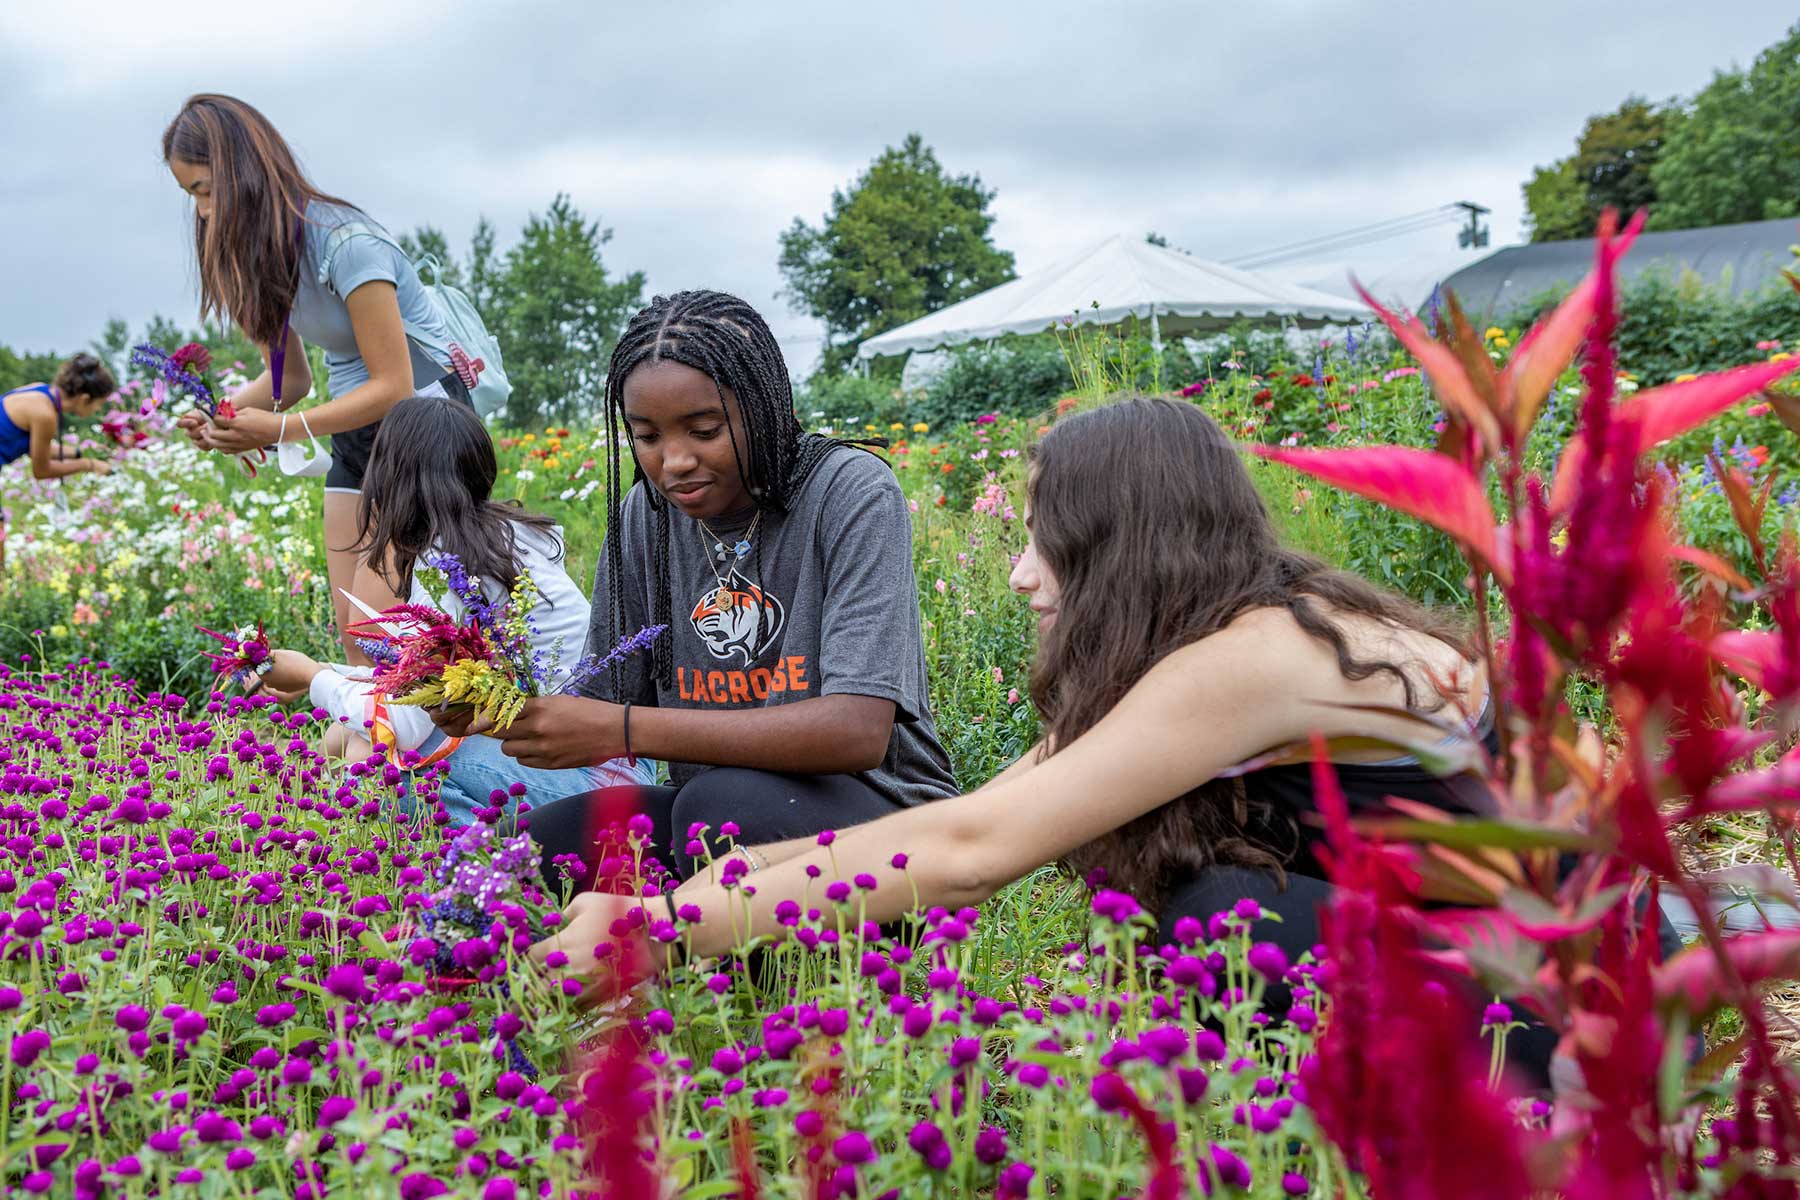 A group of young women pick ing flowers.